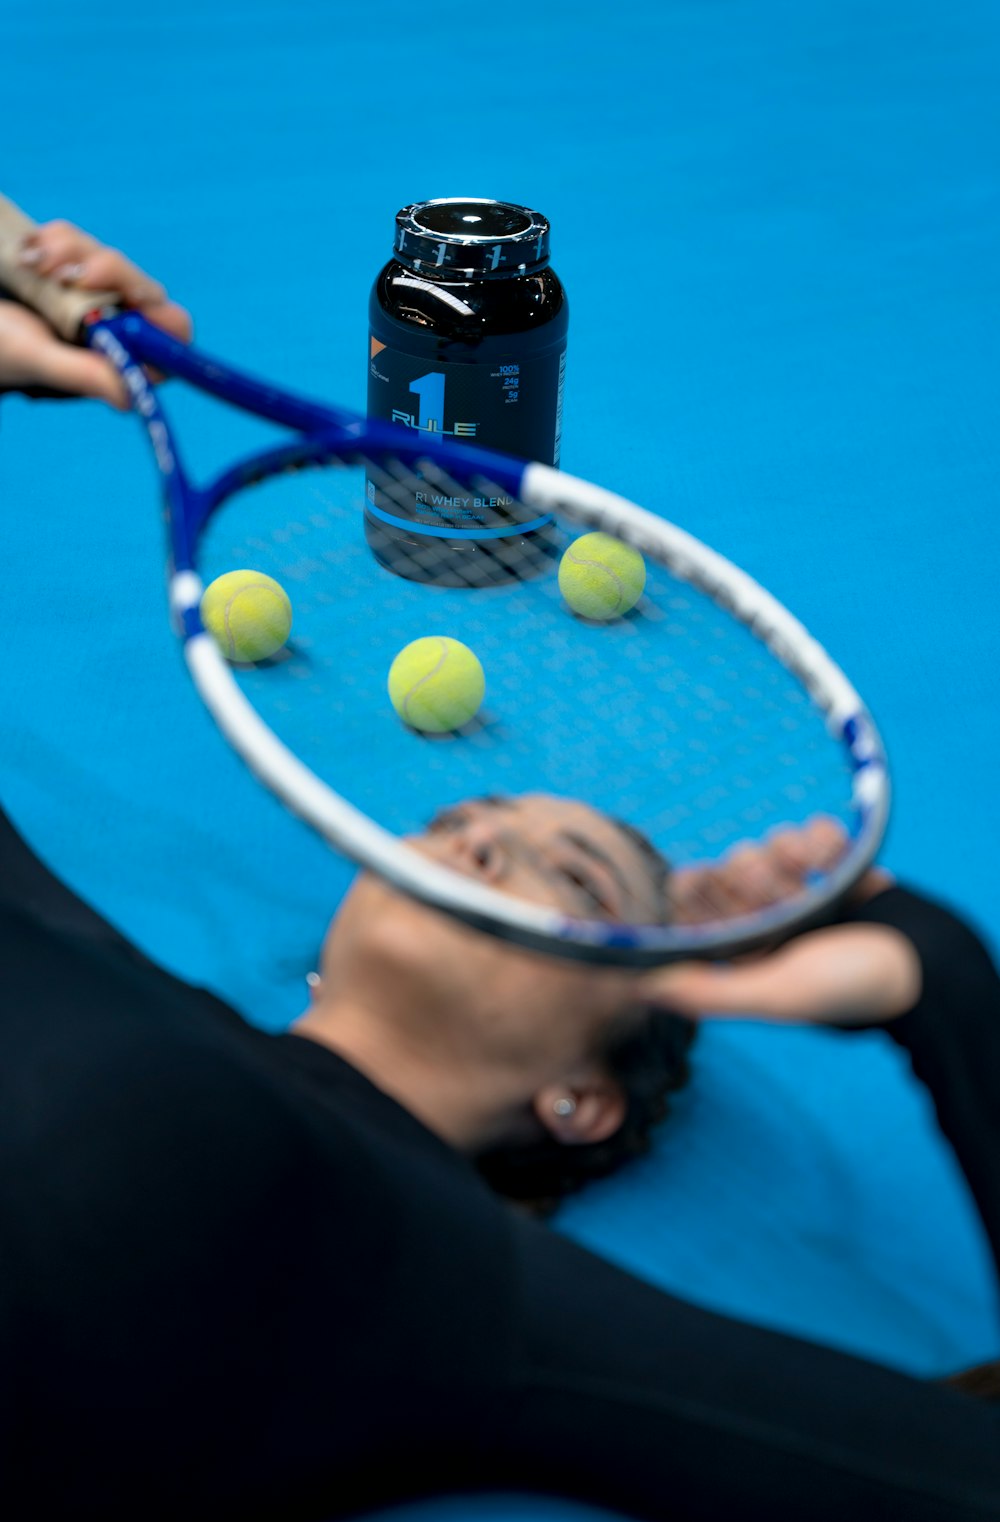 a person swinging a racket at a ball